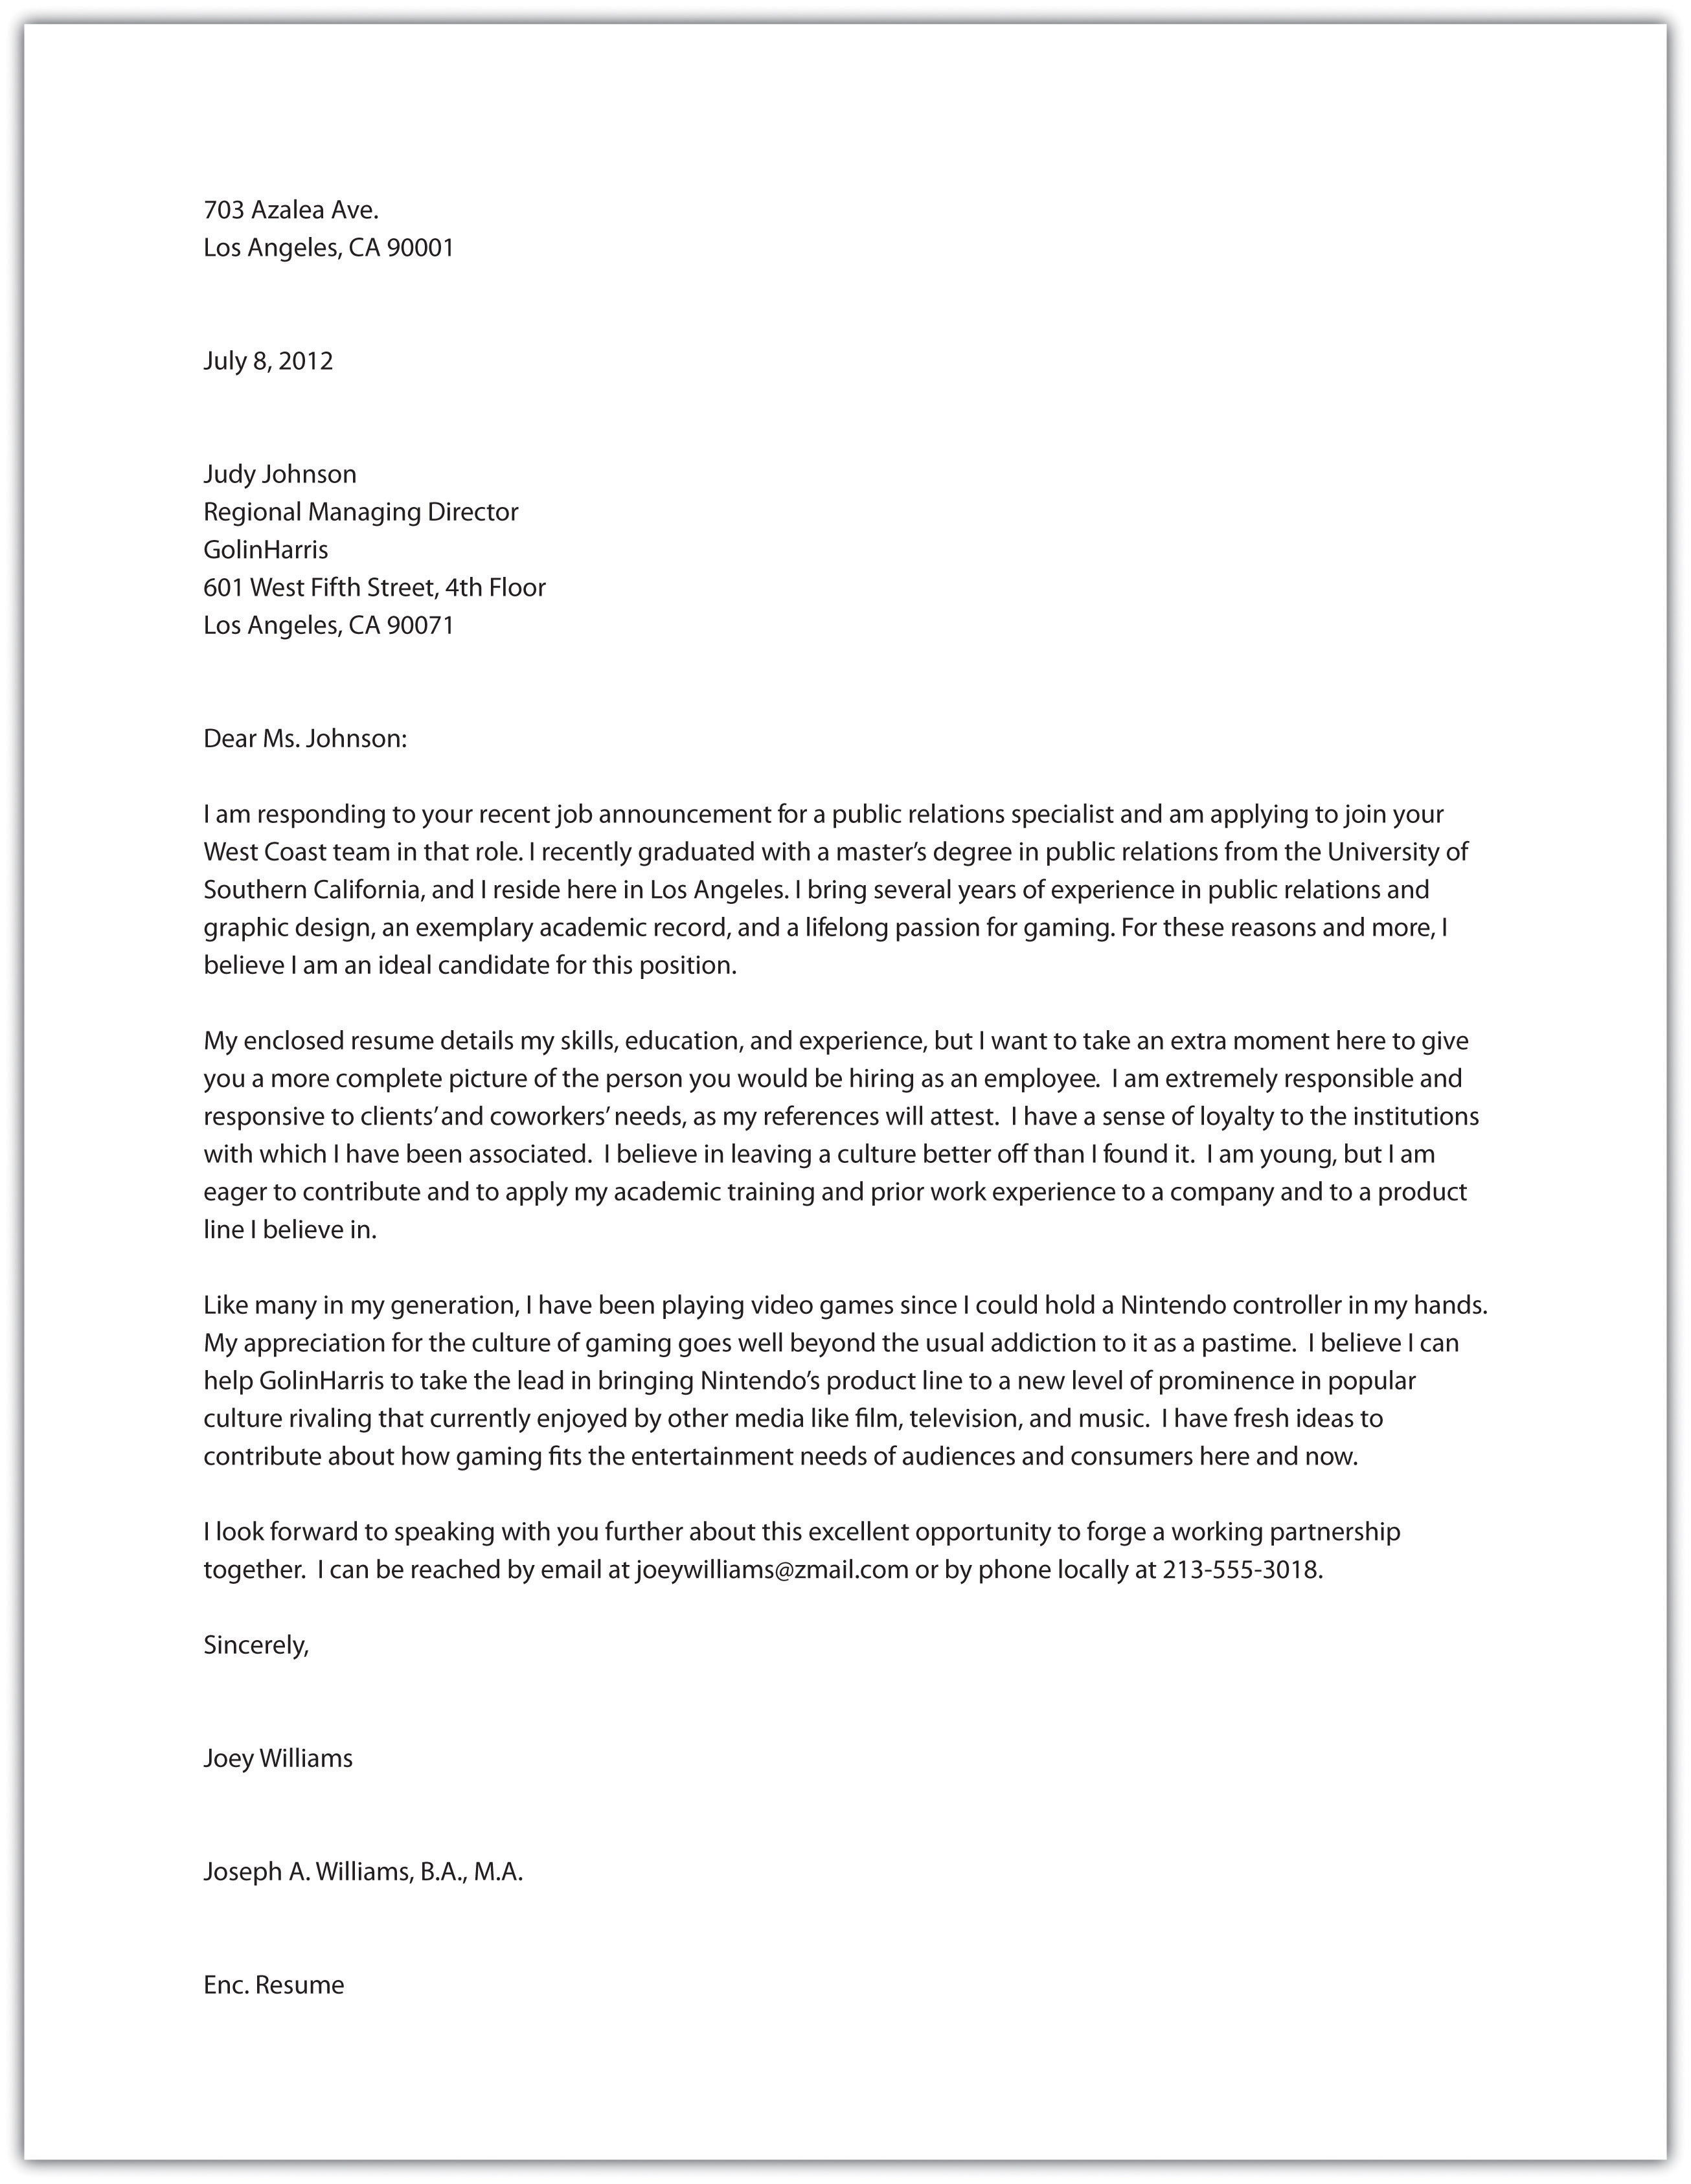 Written statement format cover letter